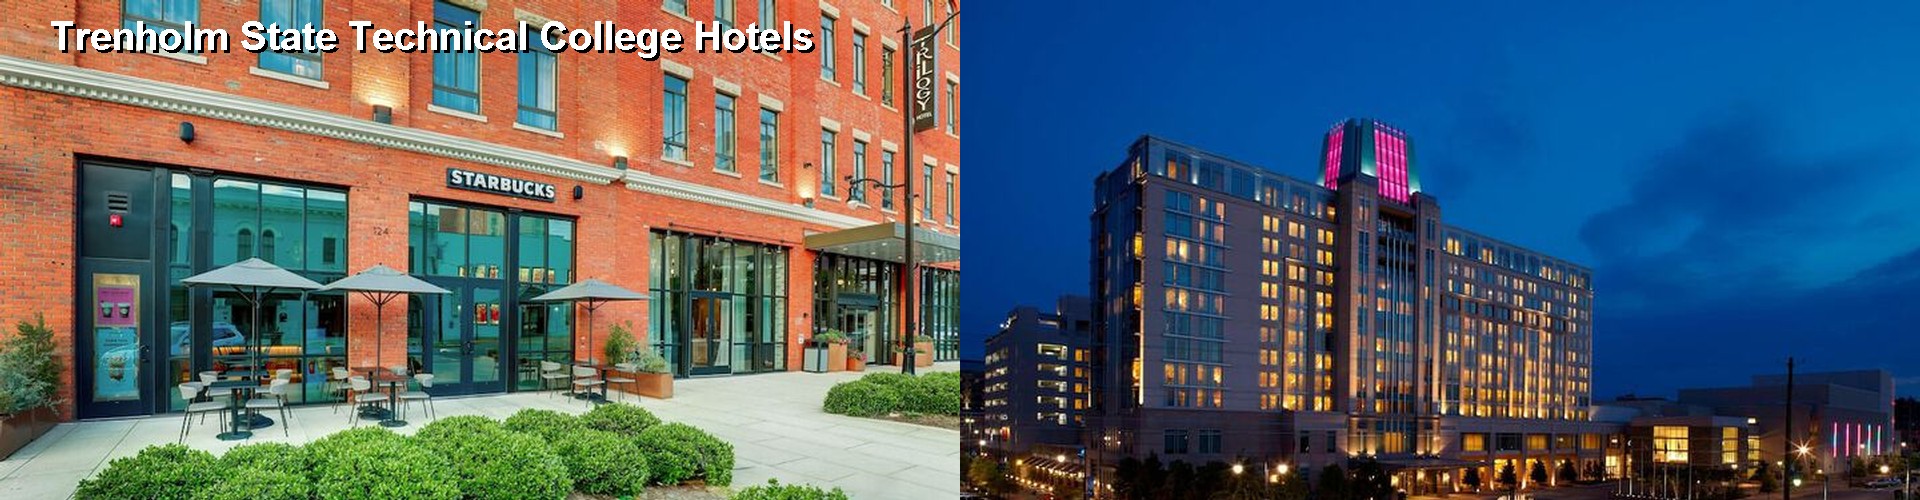 5 Best Hotels near Trenholm State Technical College